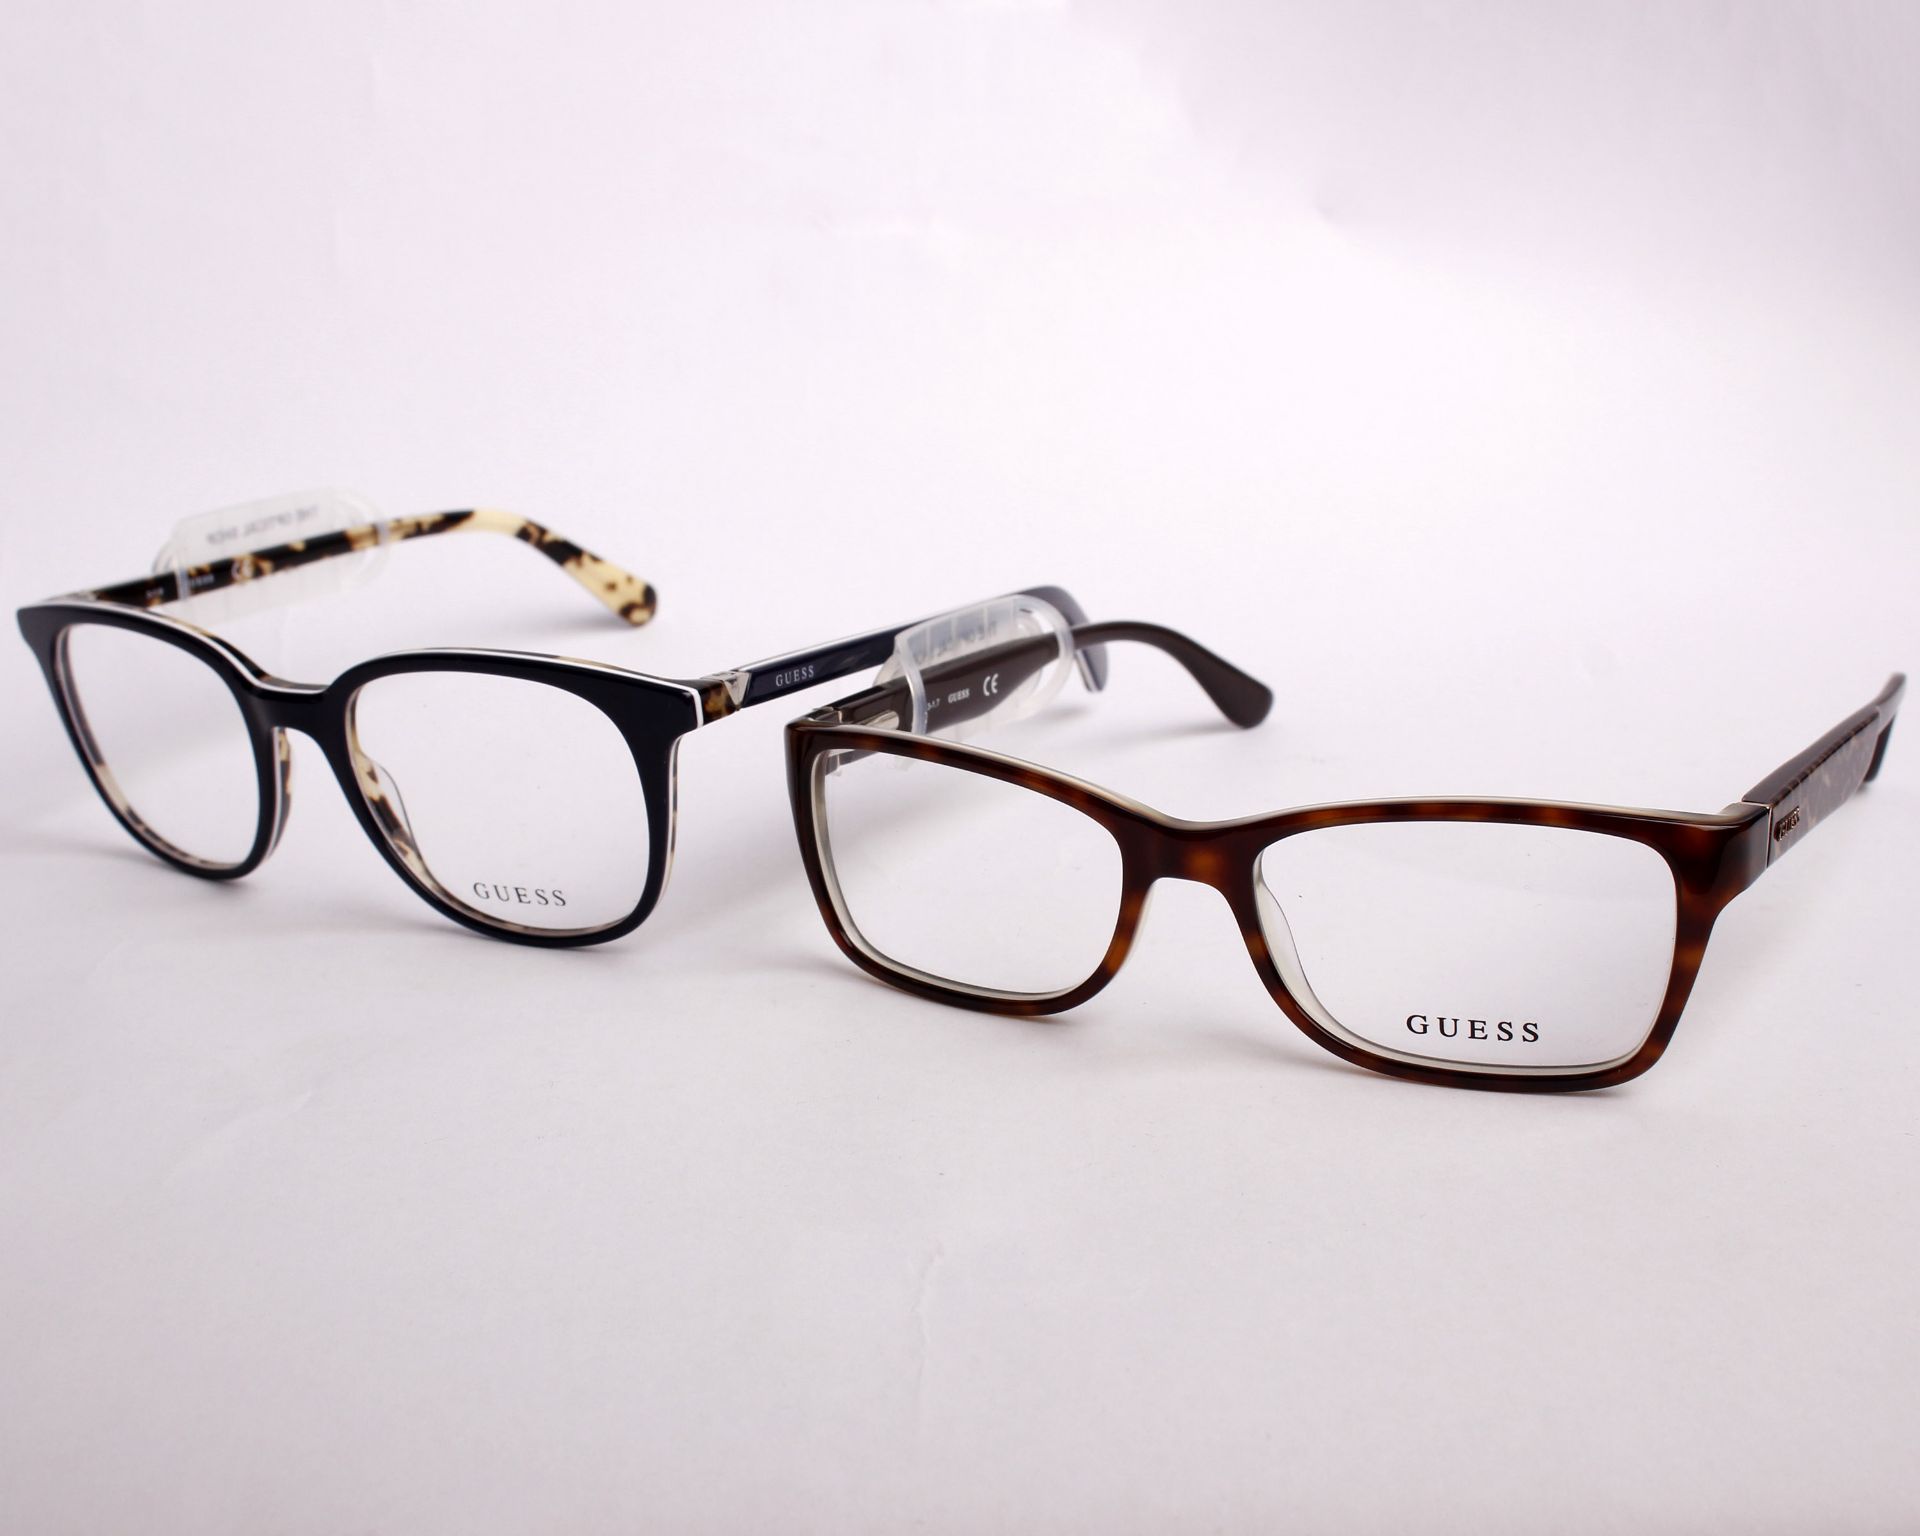 Two pairs of as new Guess glasses frames with clear glass (RRP £150 each).